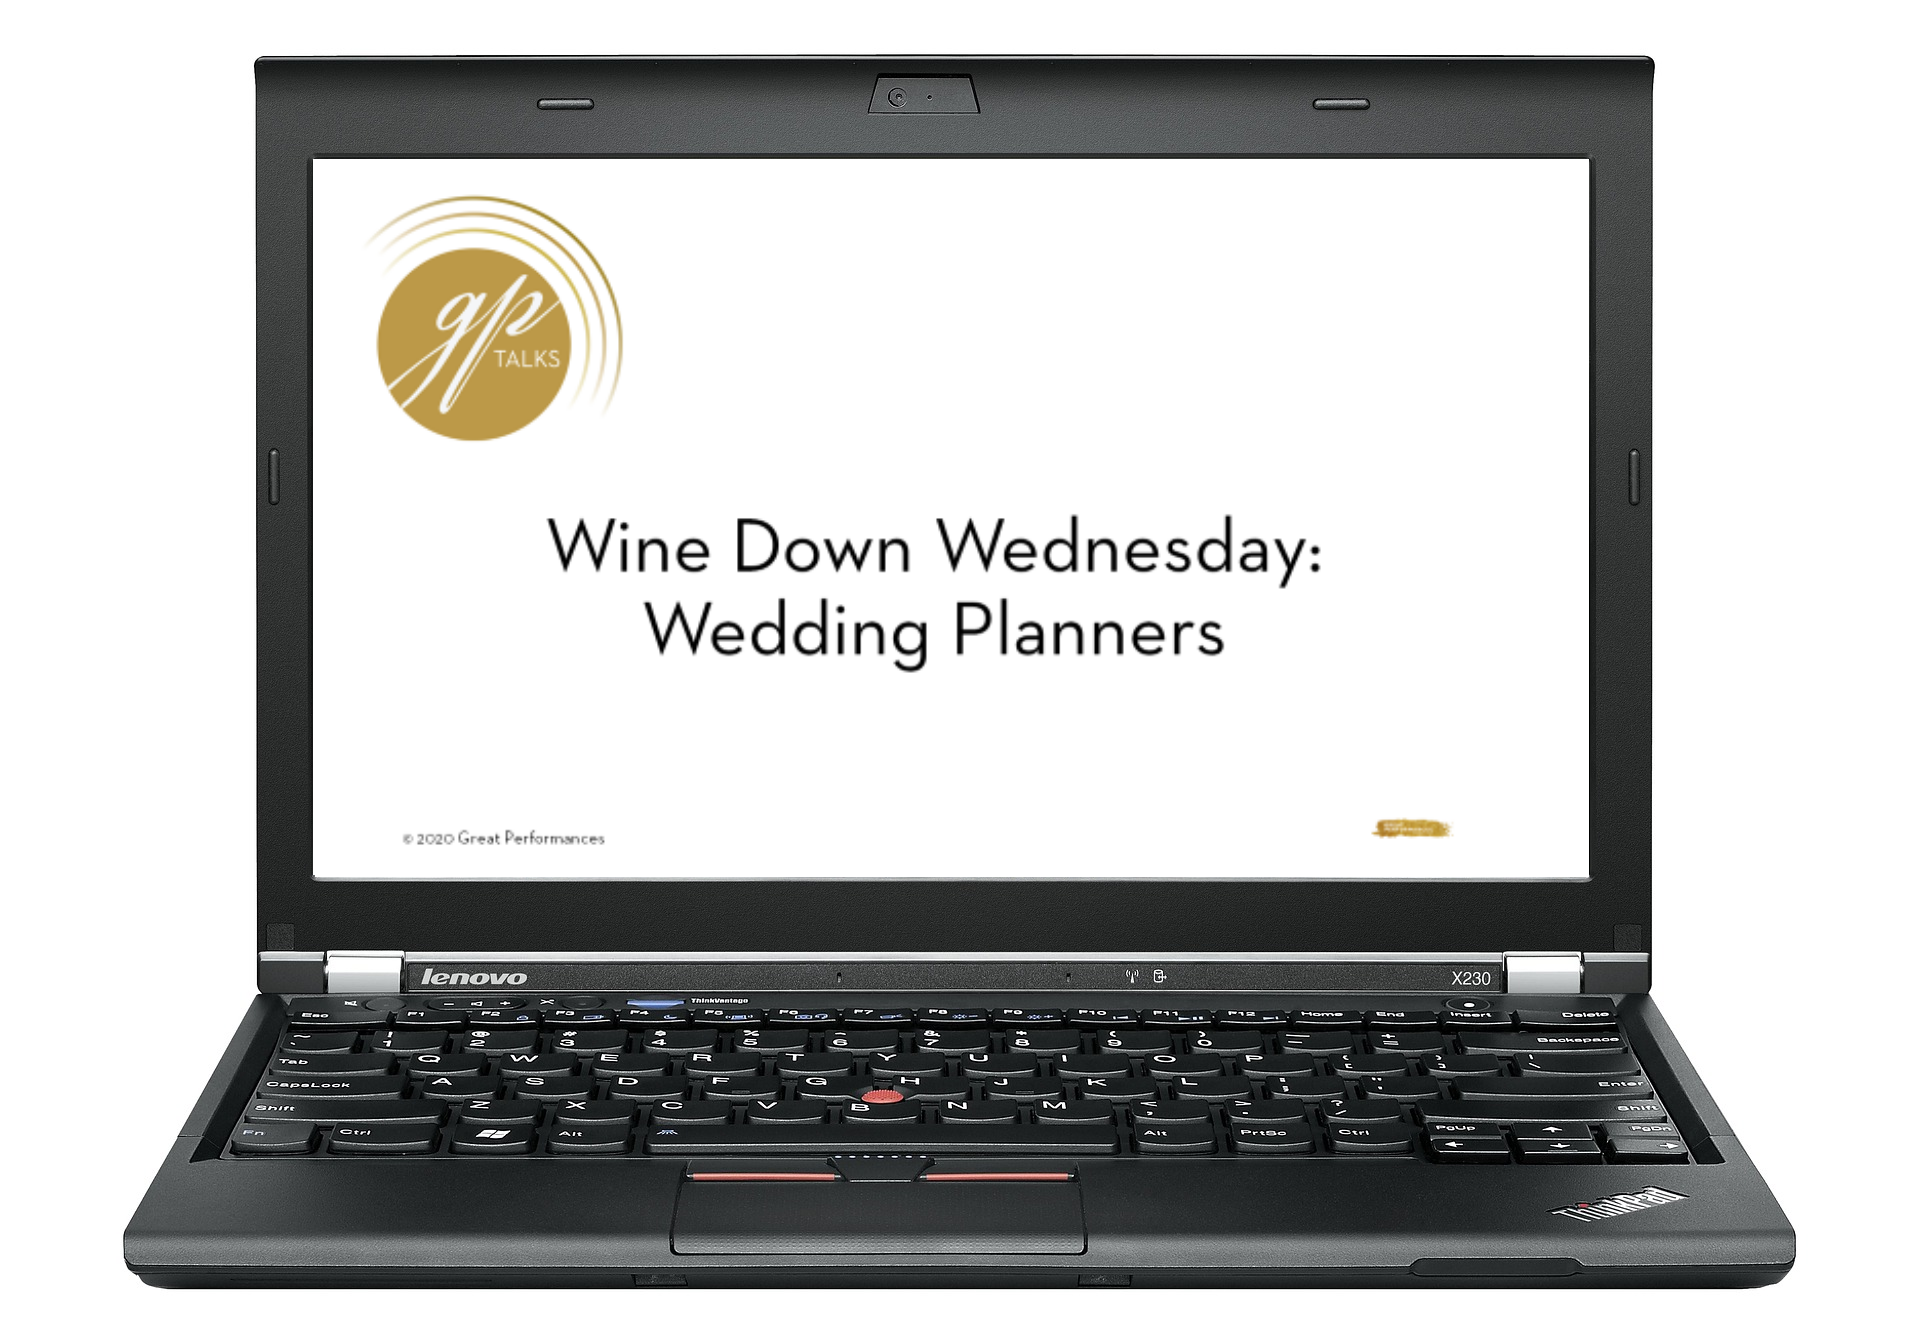 wedding planners to discuss what weddings will look like in the future.